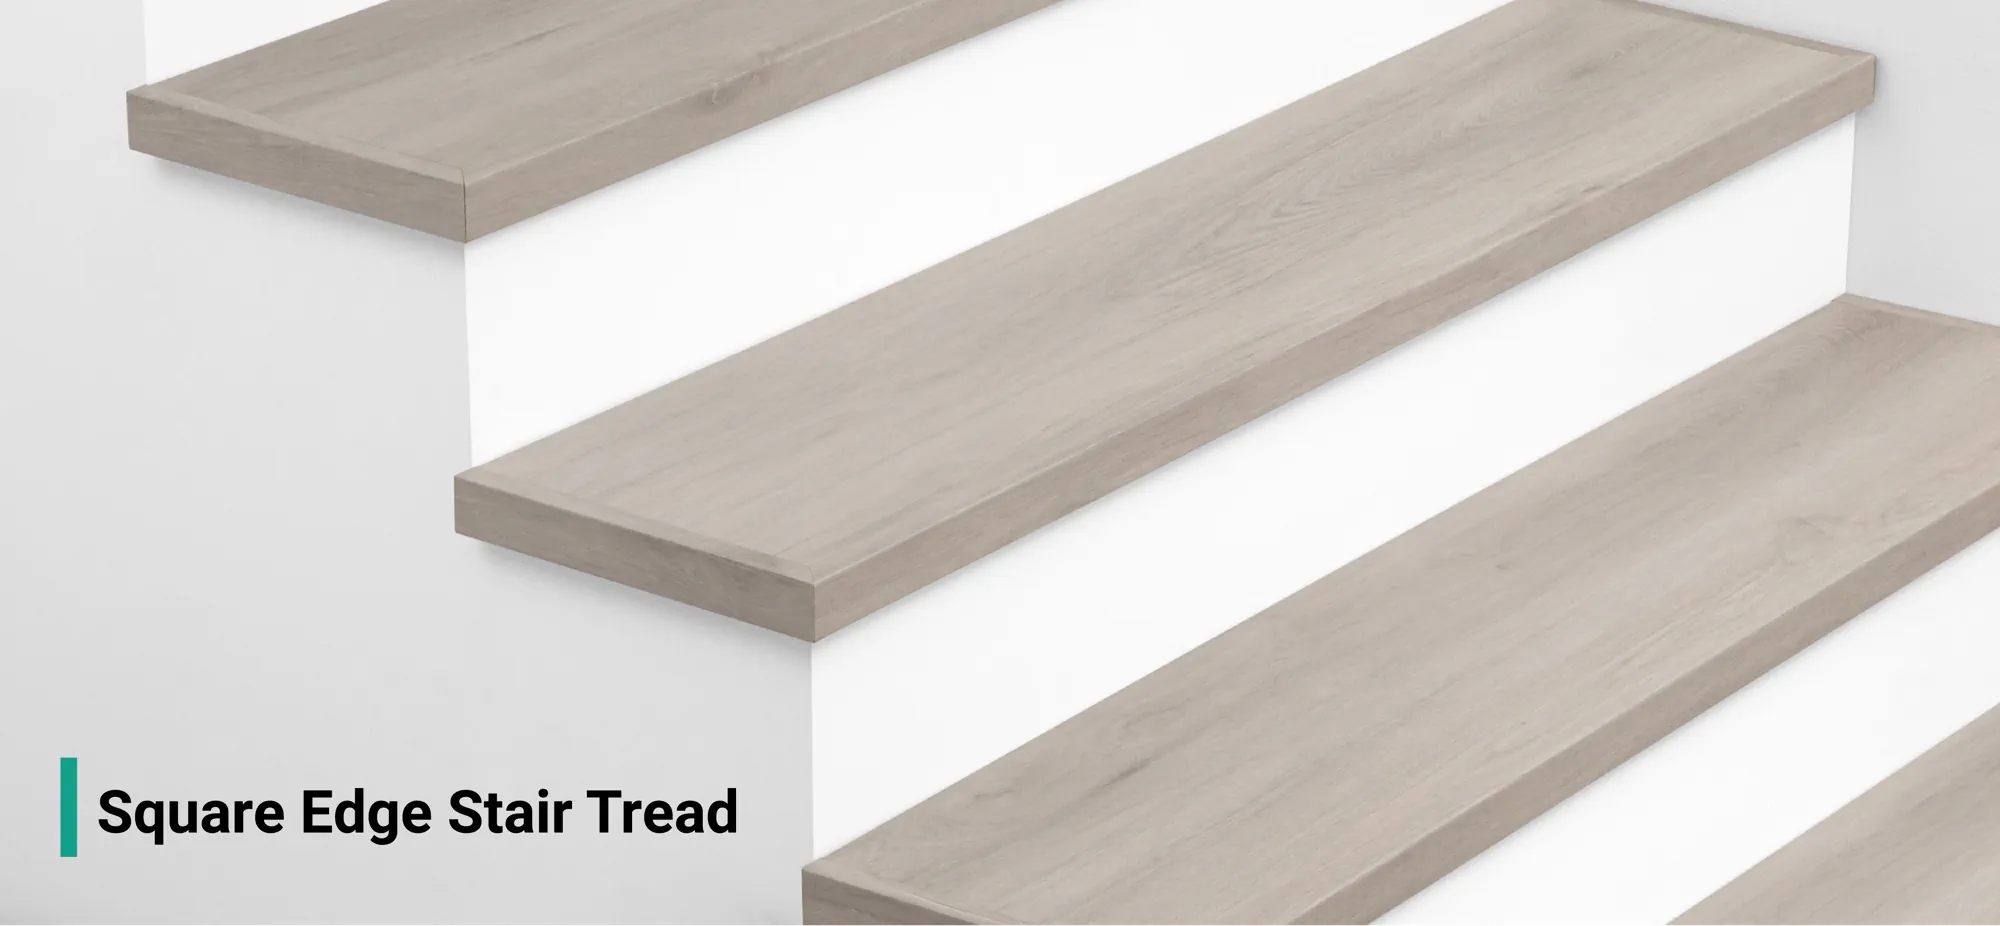 All-In-One waterproof stair treads installed on a staircase.